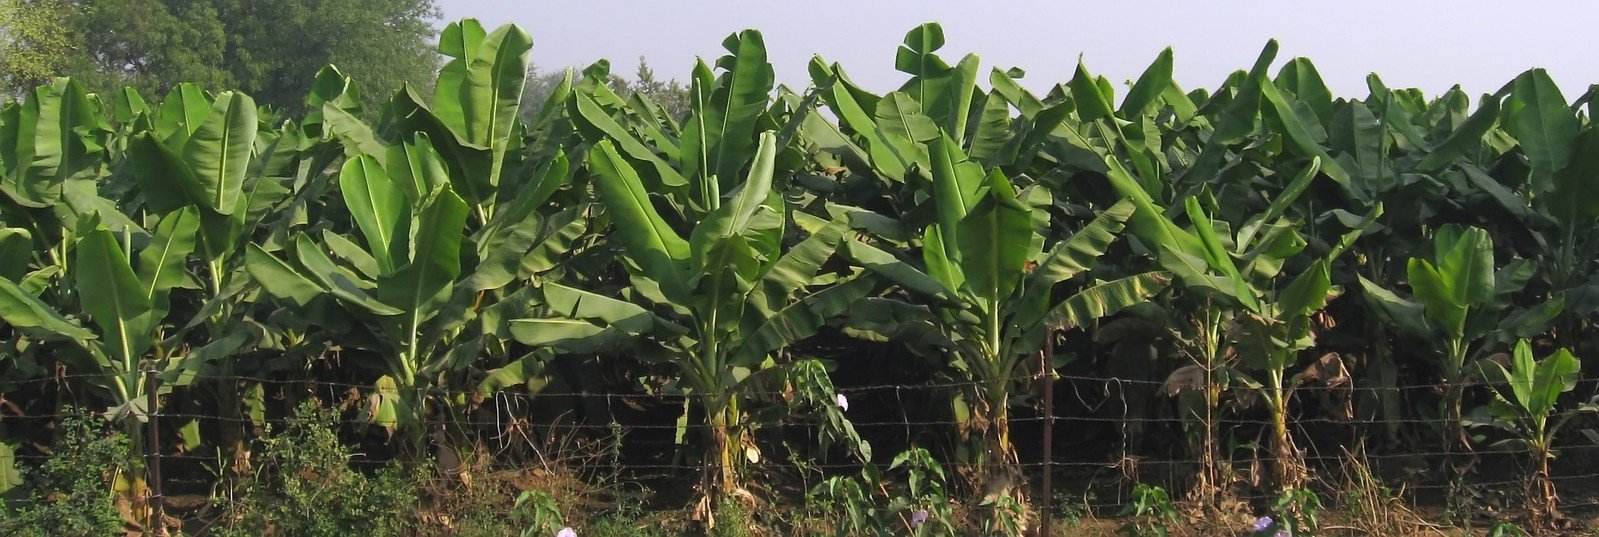 large banana trees growing behind a fence in front of a tree